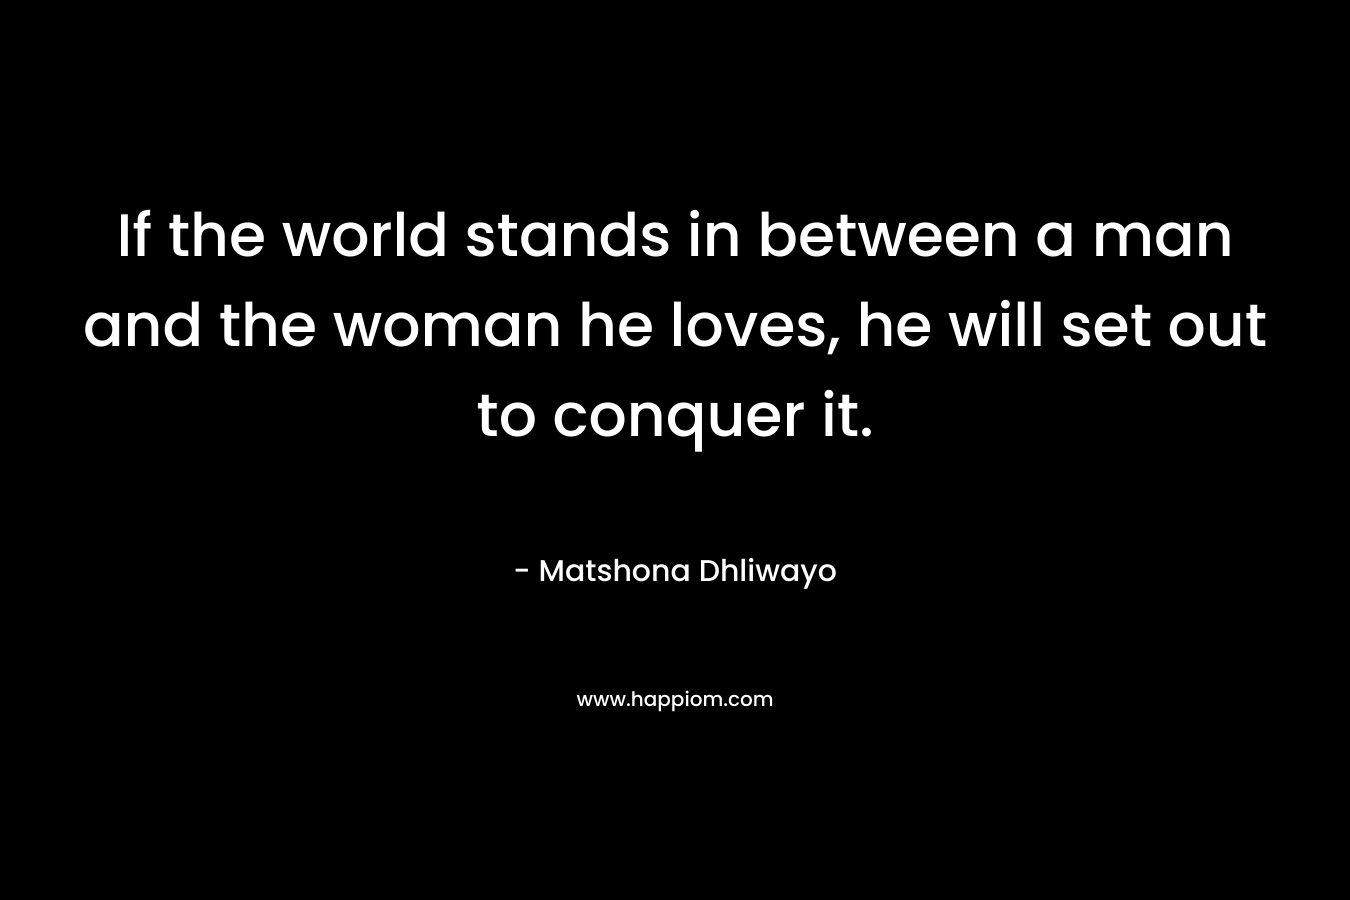 If the world stands in between a man and the woman he loves, he will set out to conquer it.